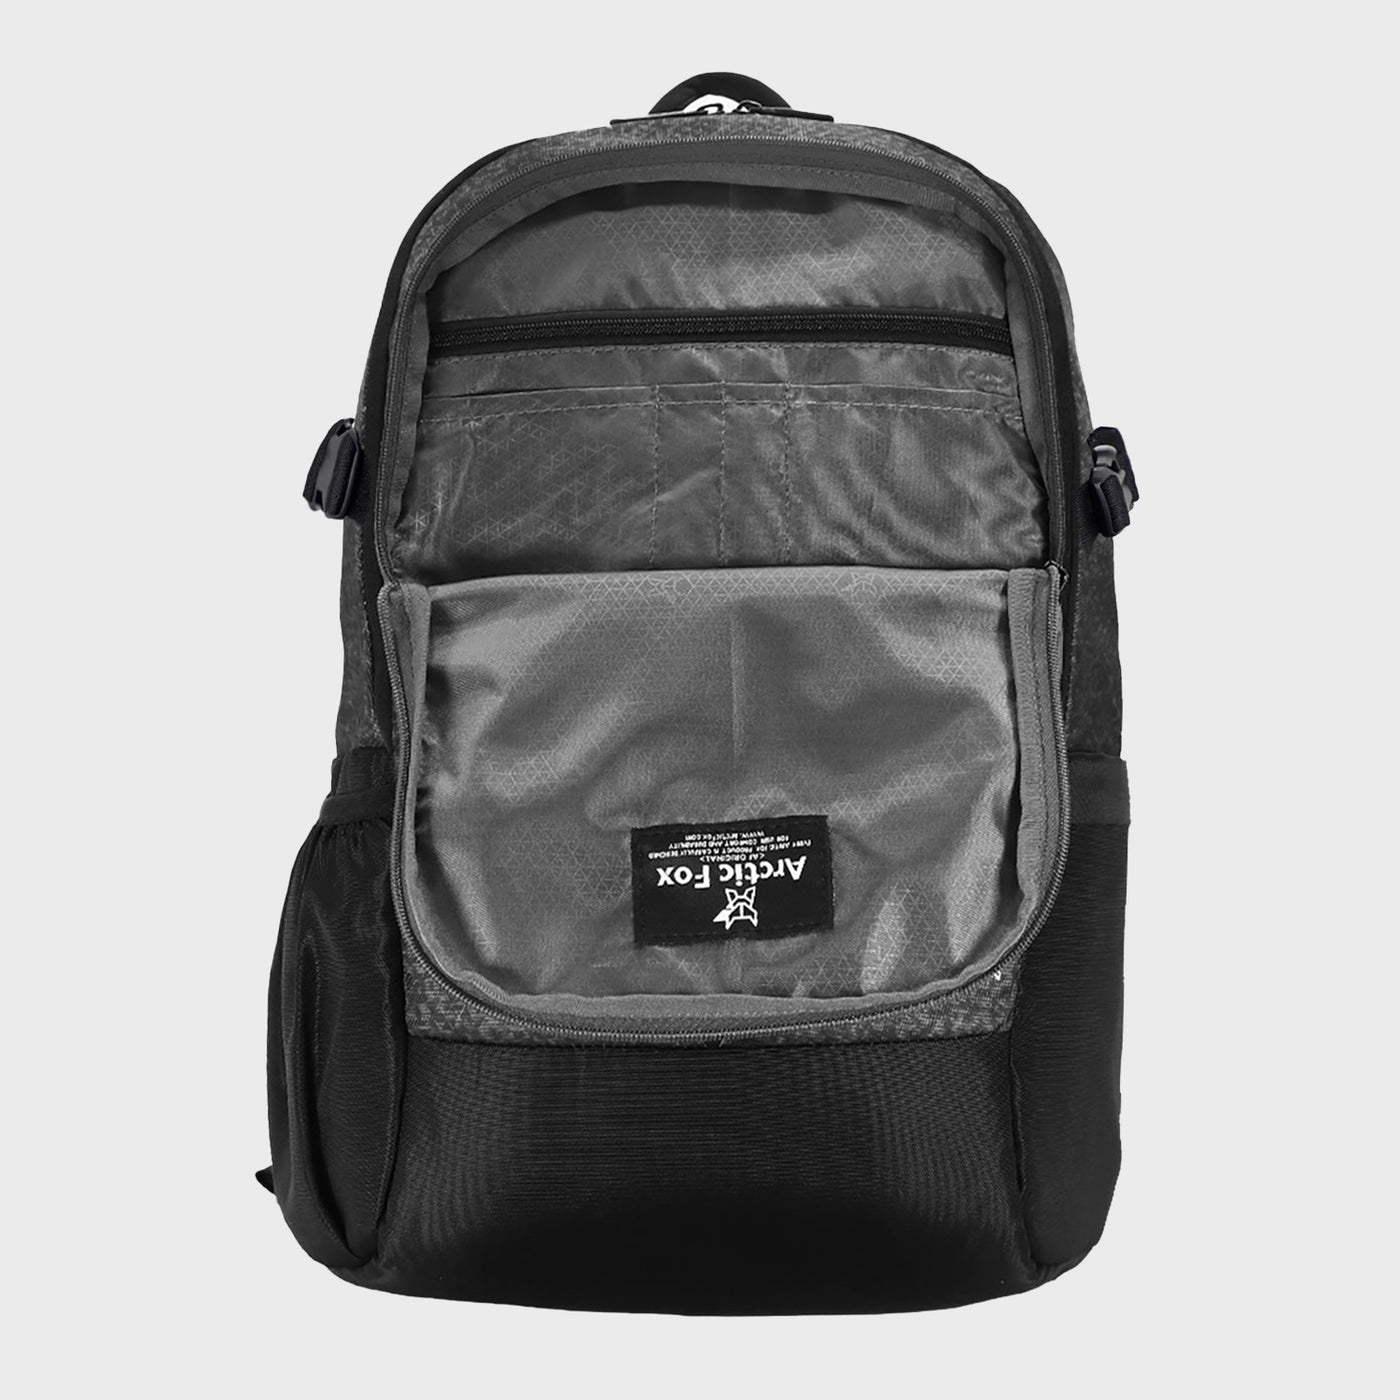 Arctic Fox Glitch Jet Black Big  36 Ltr Everyday And Hiking  Backpack